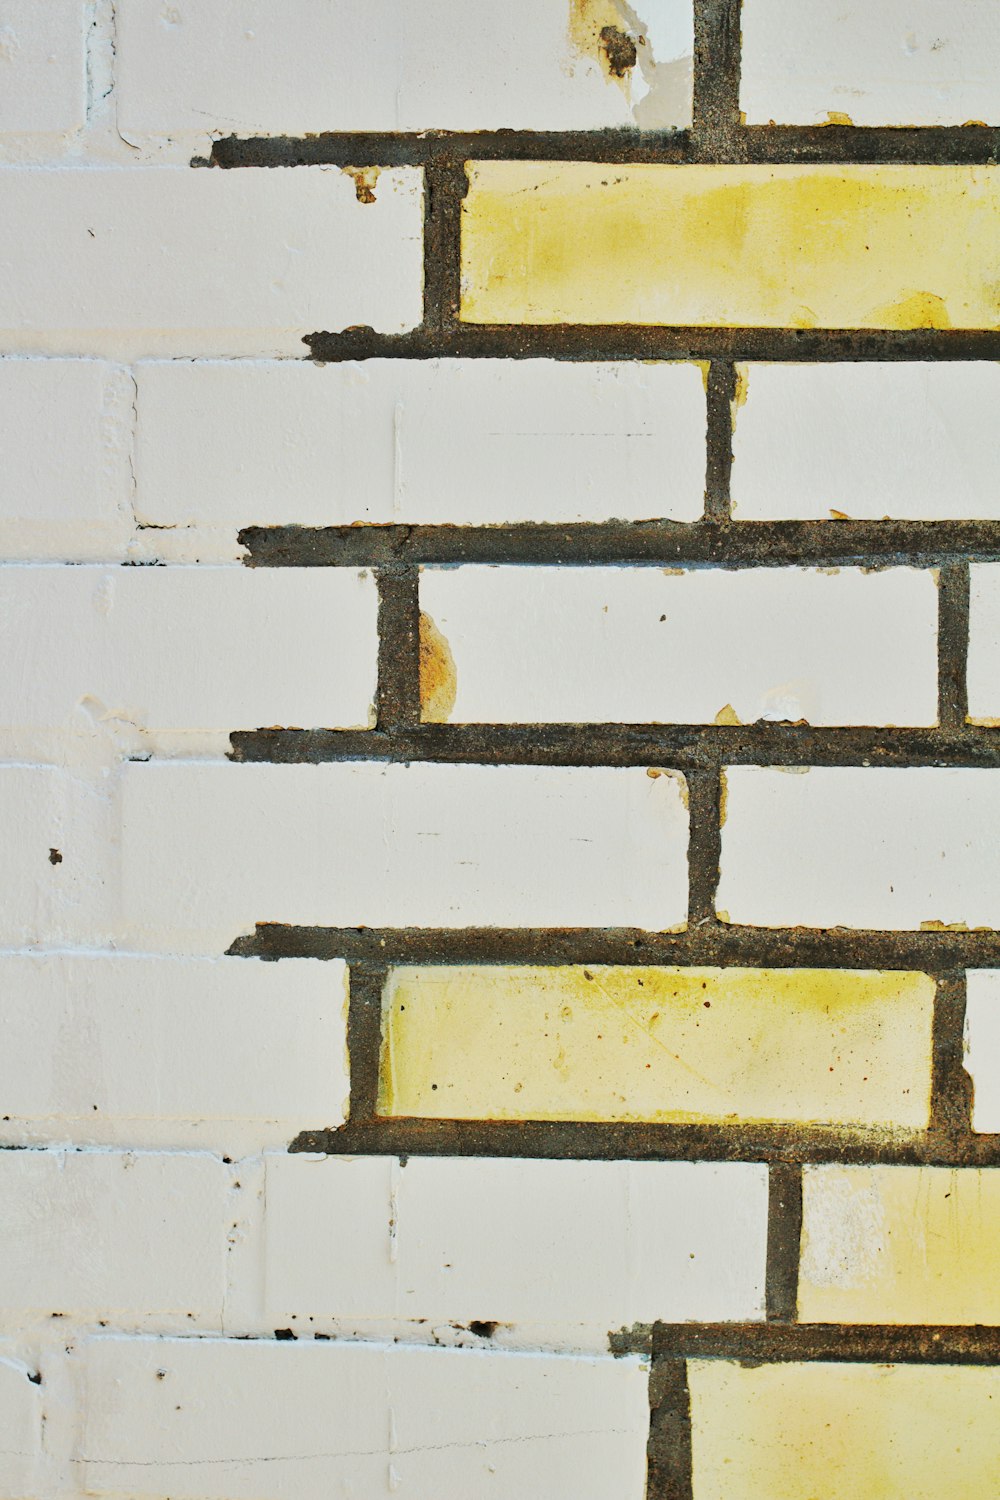 a close up of a brick wall with yellow paint